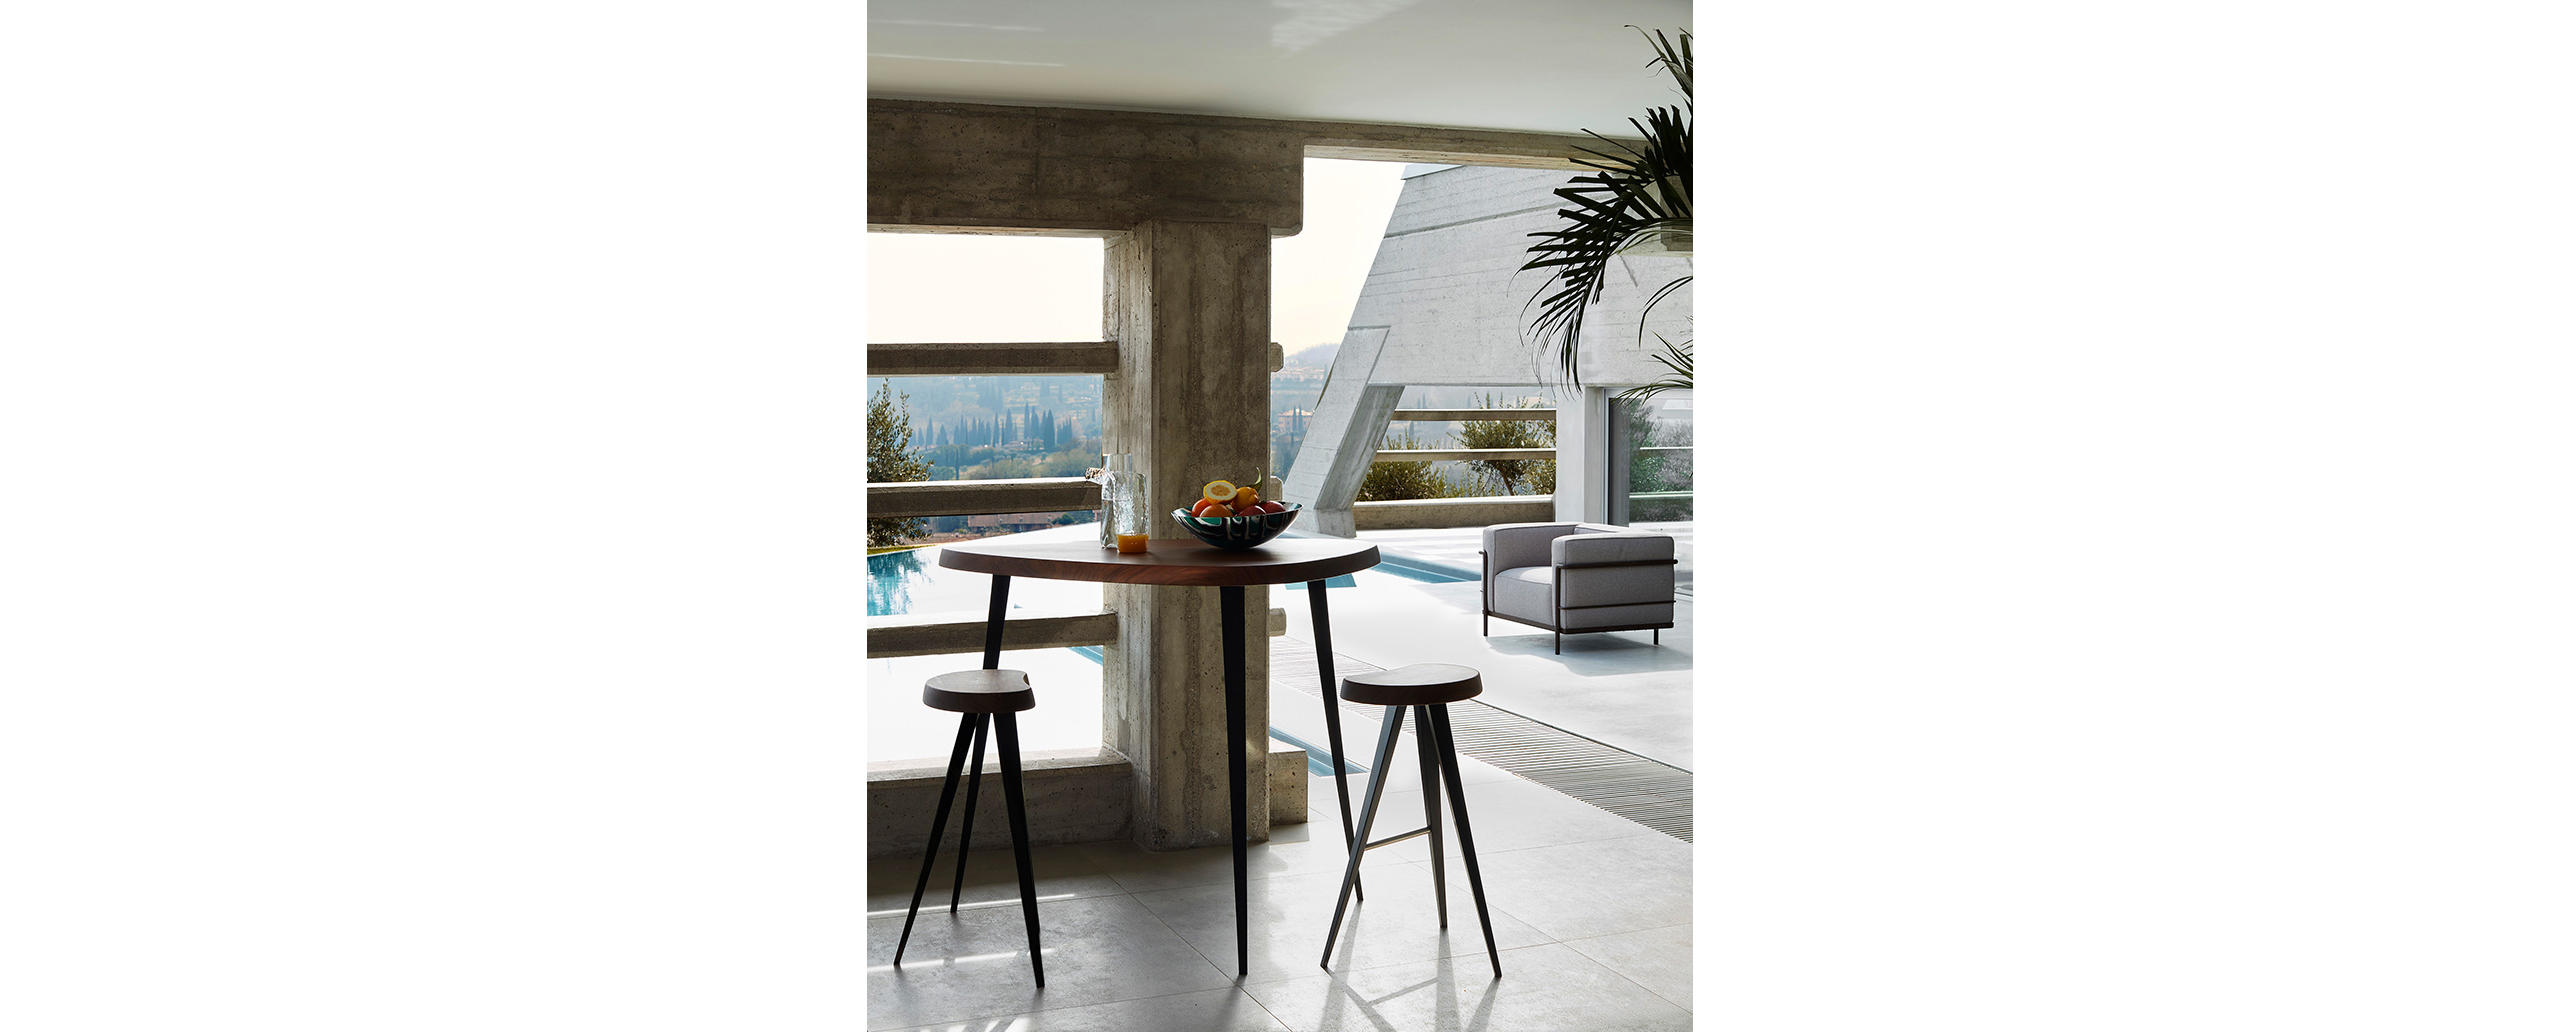 3_cassina_mexique_charlotte_perriand_bar_stool_and_table_photodepasqualemaffini